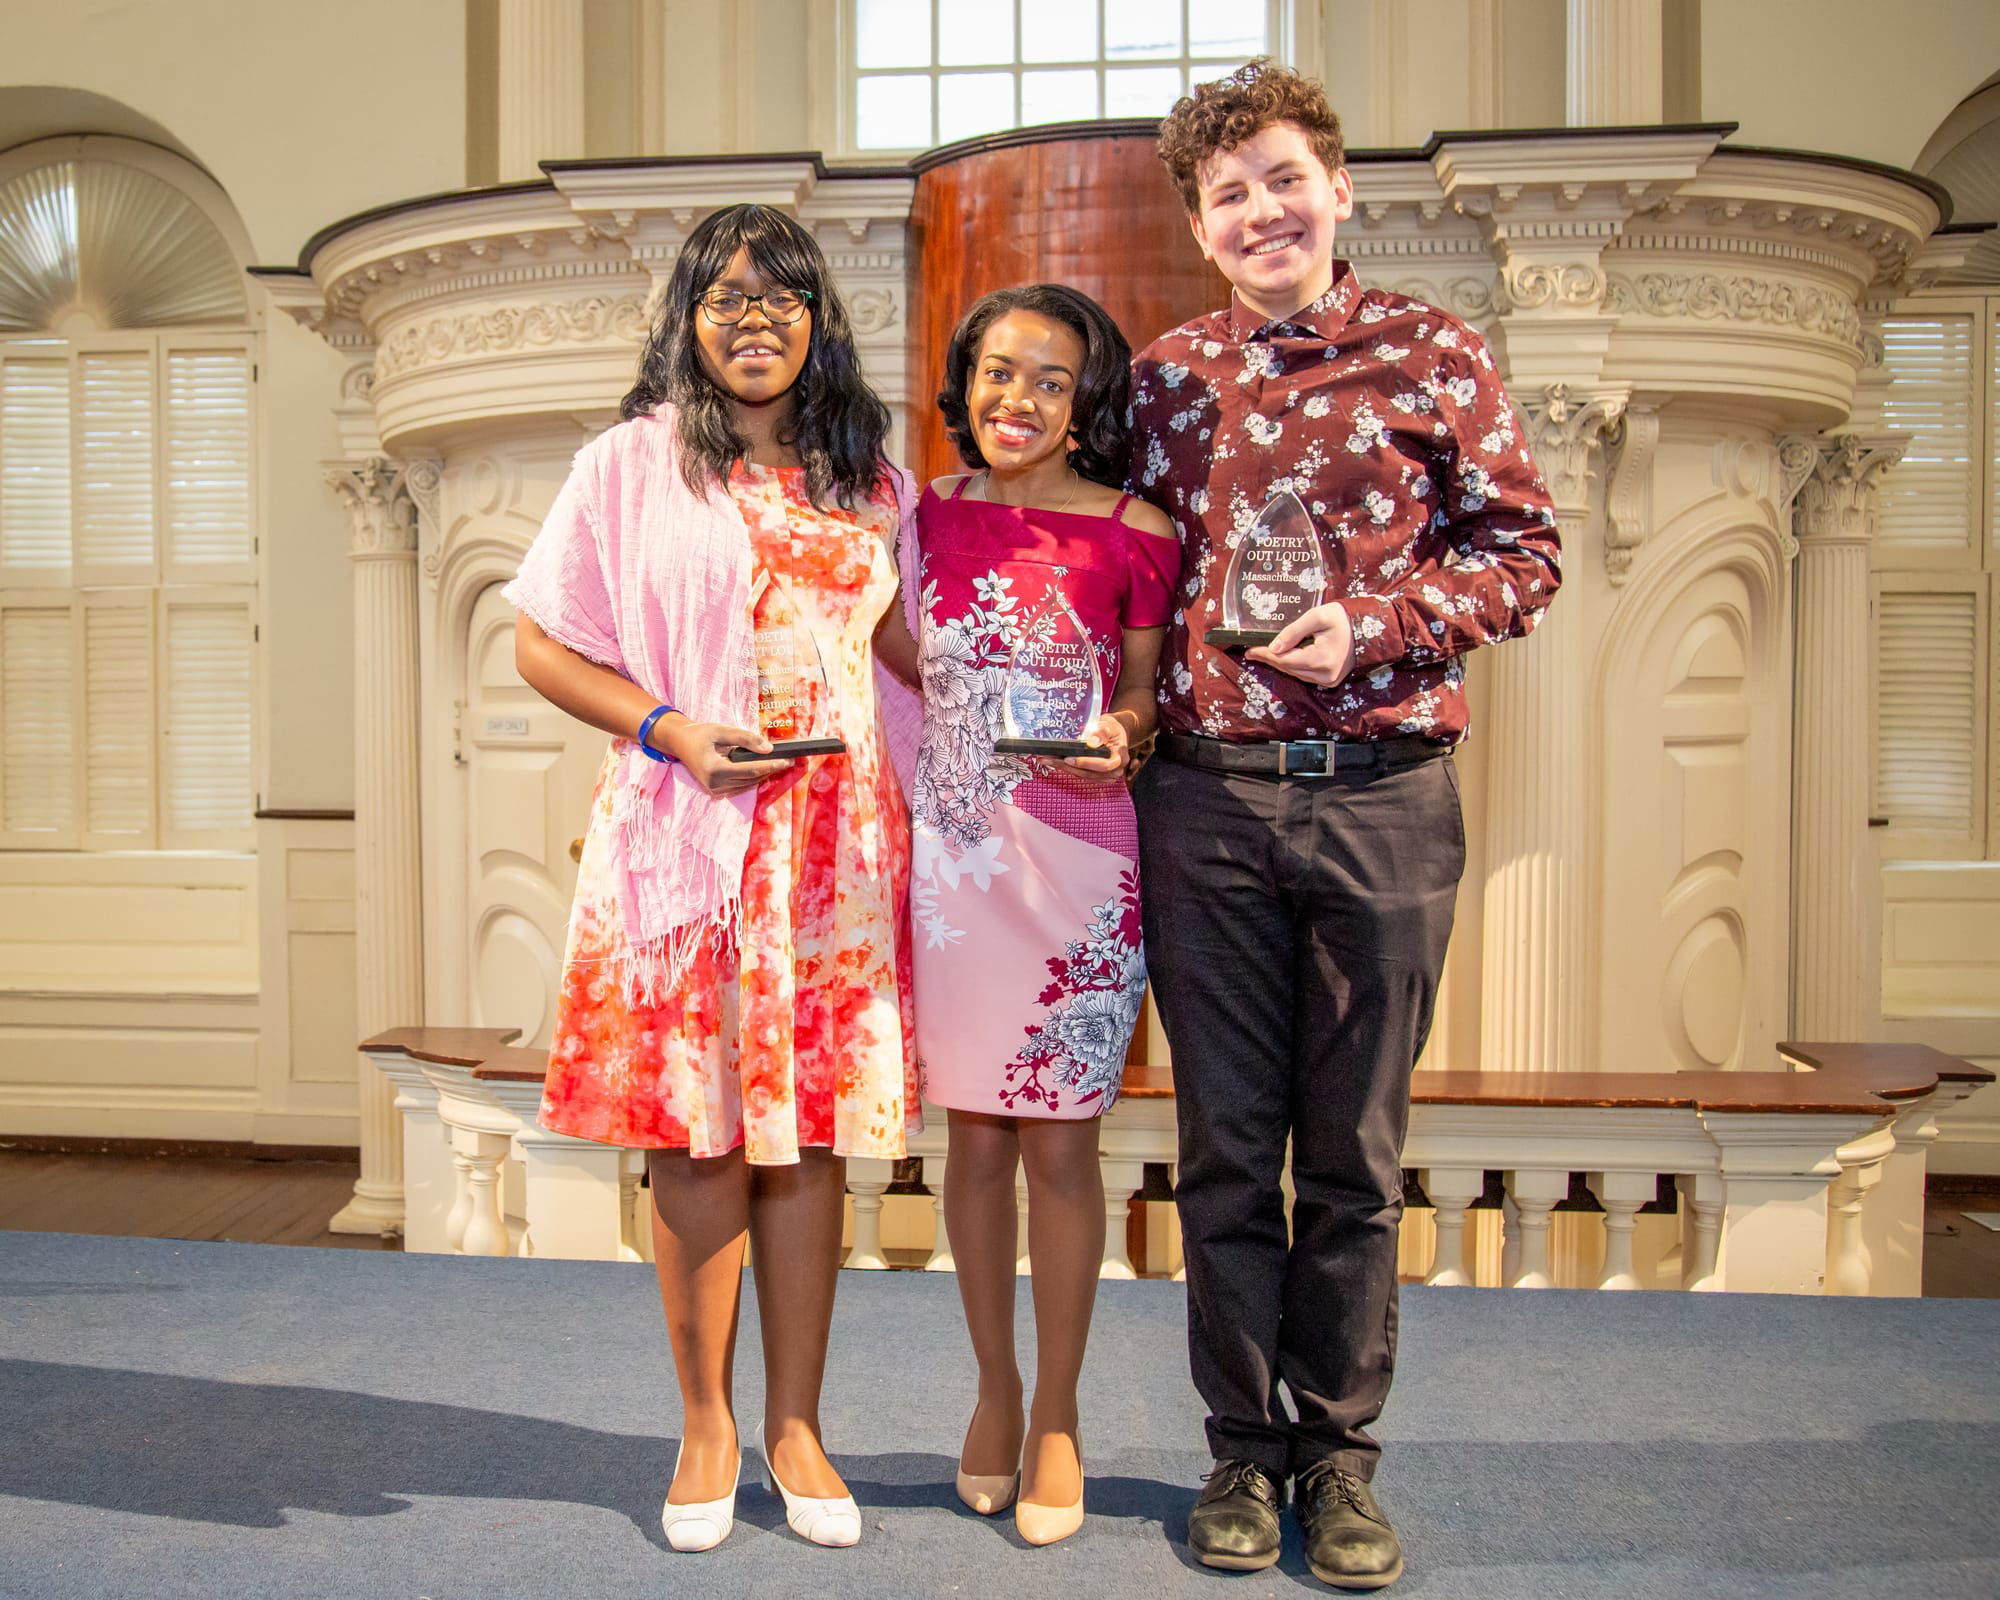 Worcester Tech's Anya Barrett named 2020 Mass. Poetry Out Loud (POL) Champion  - Huntington Theatre Company